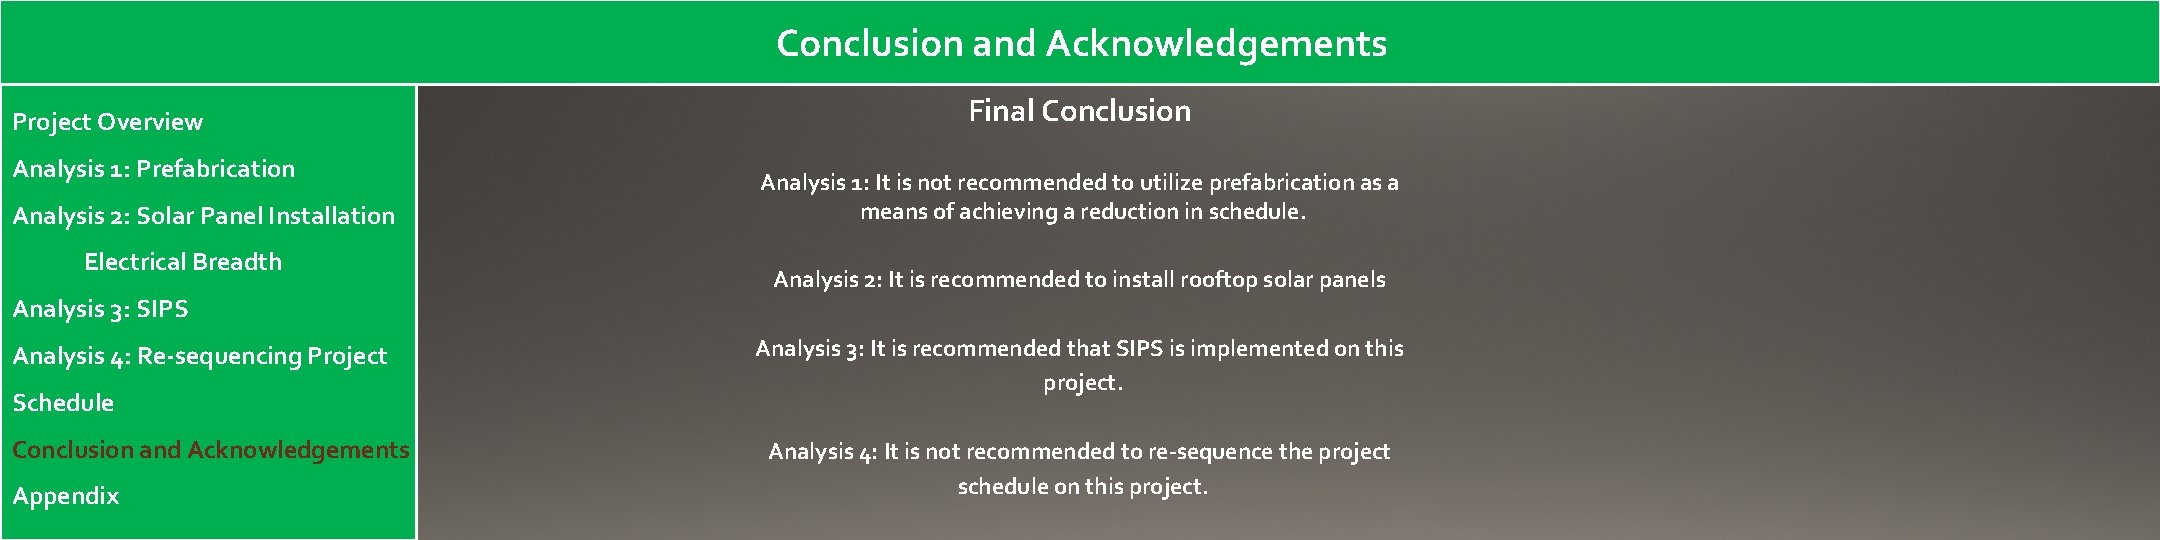 Conclusion and Acknowledgements Project Overview Analysis 1: Prefabrication Analysis 2: Solar Panel Installation Electrical